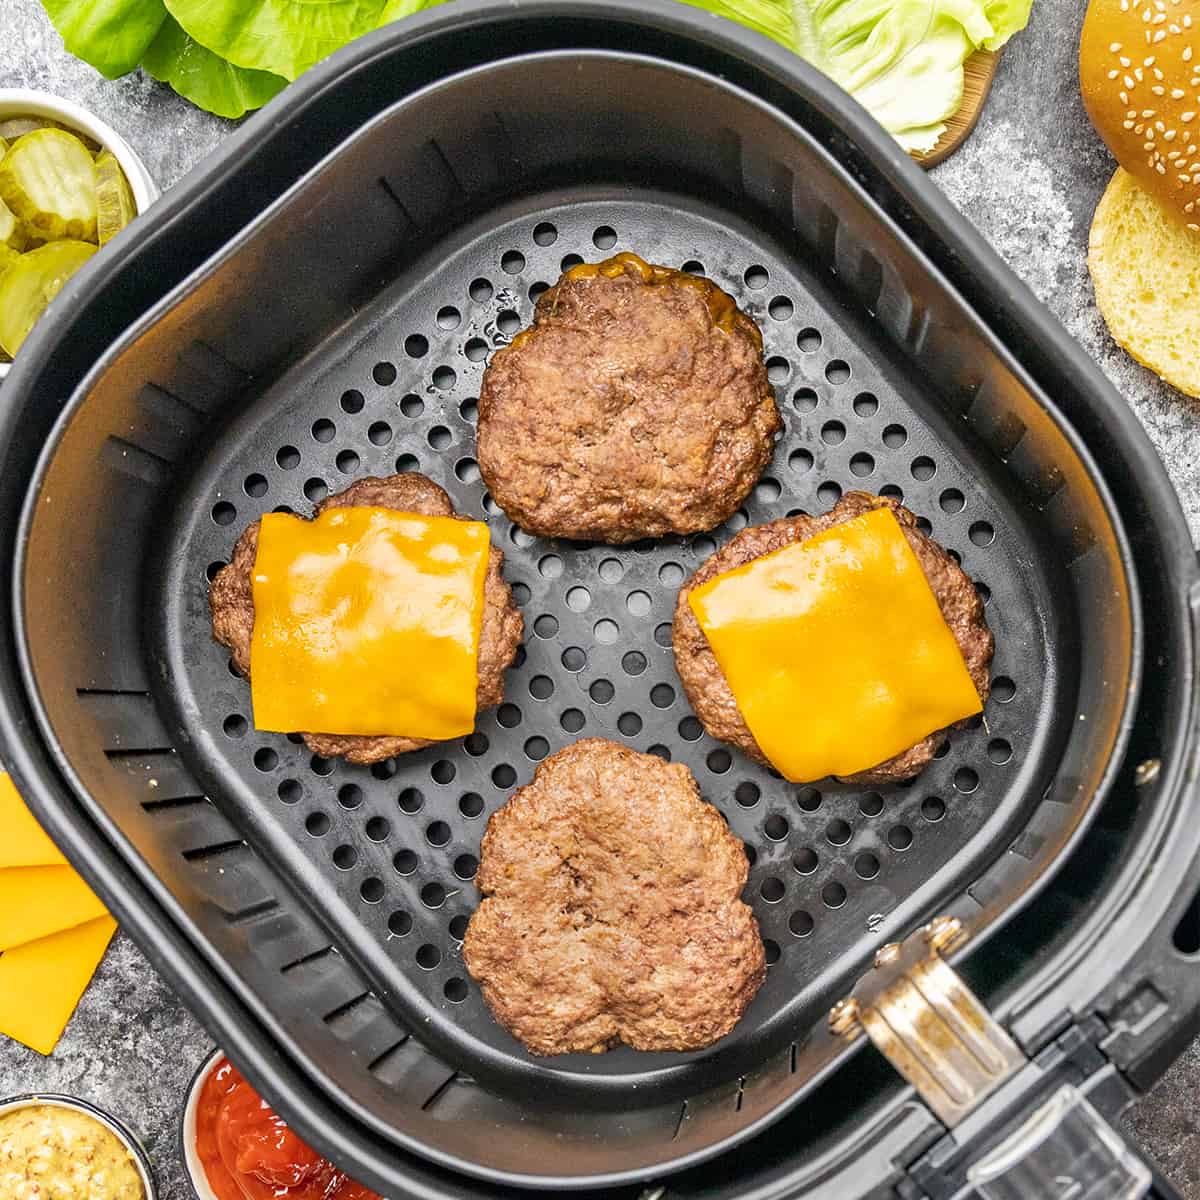 Overhead view looking into an air fryer basket with hamburgers.